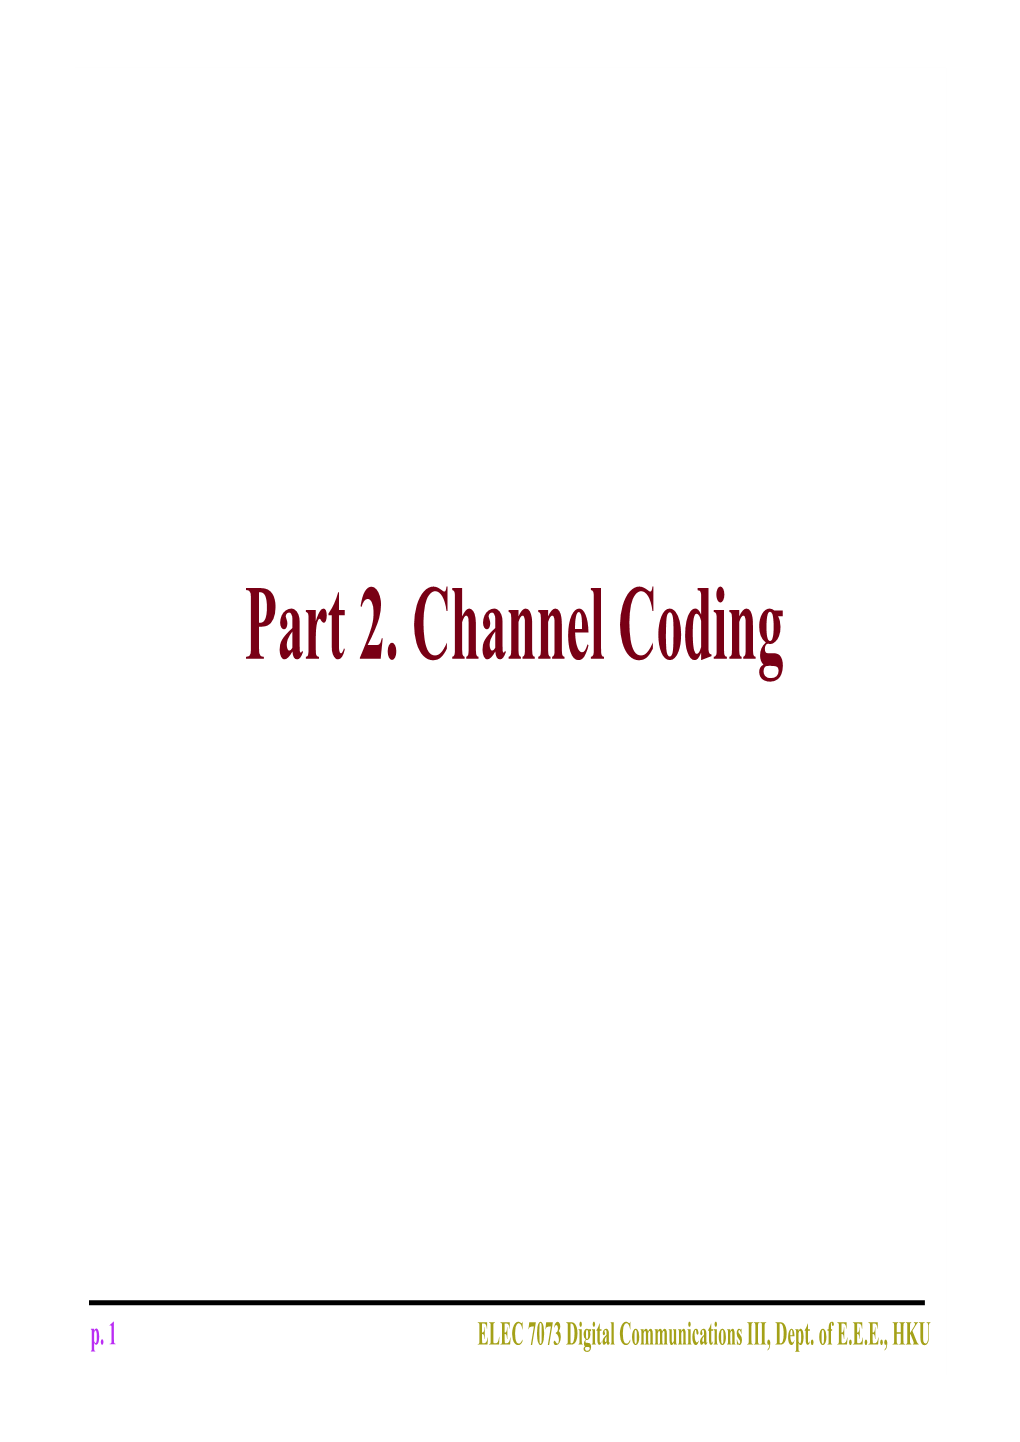 Channel Coding--Block Codes